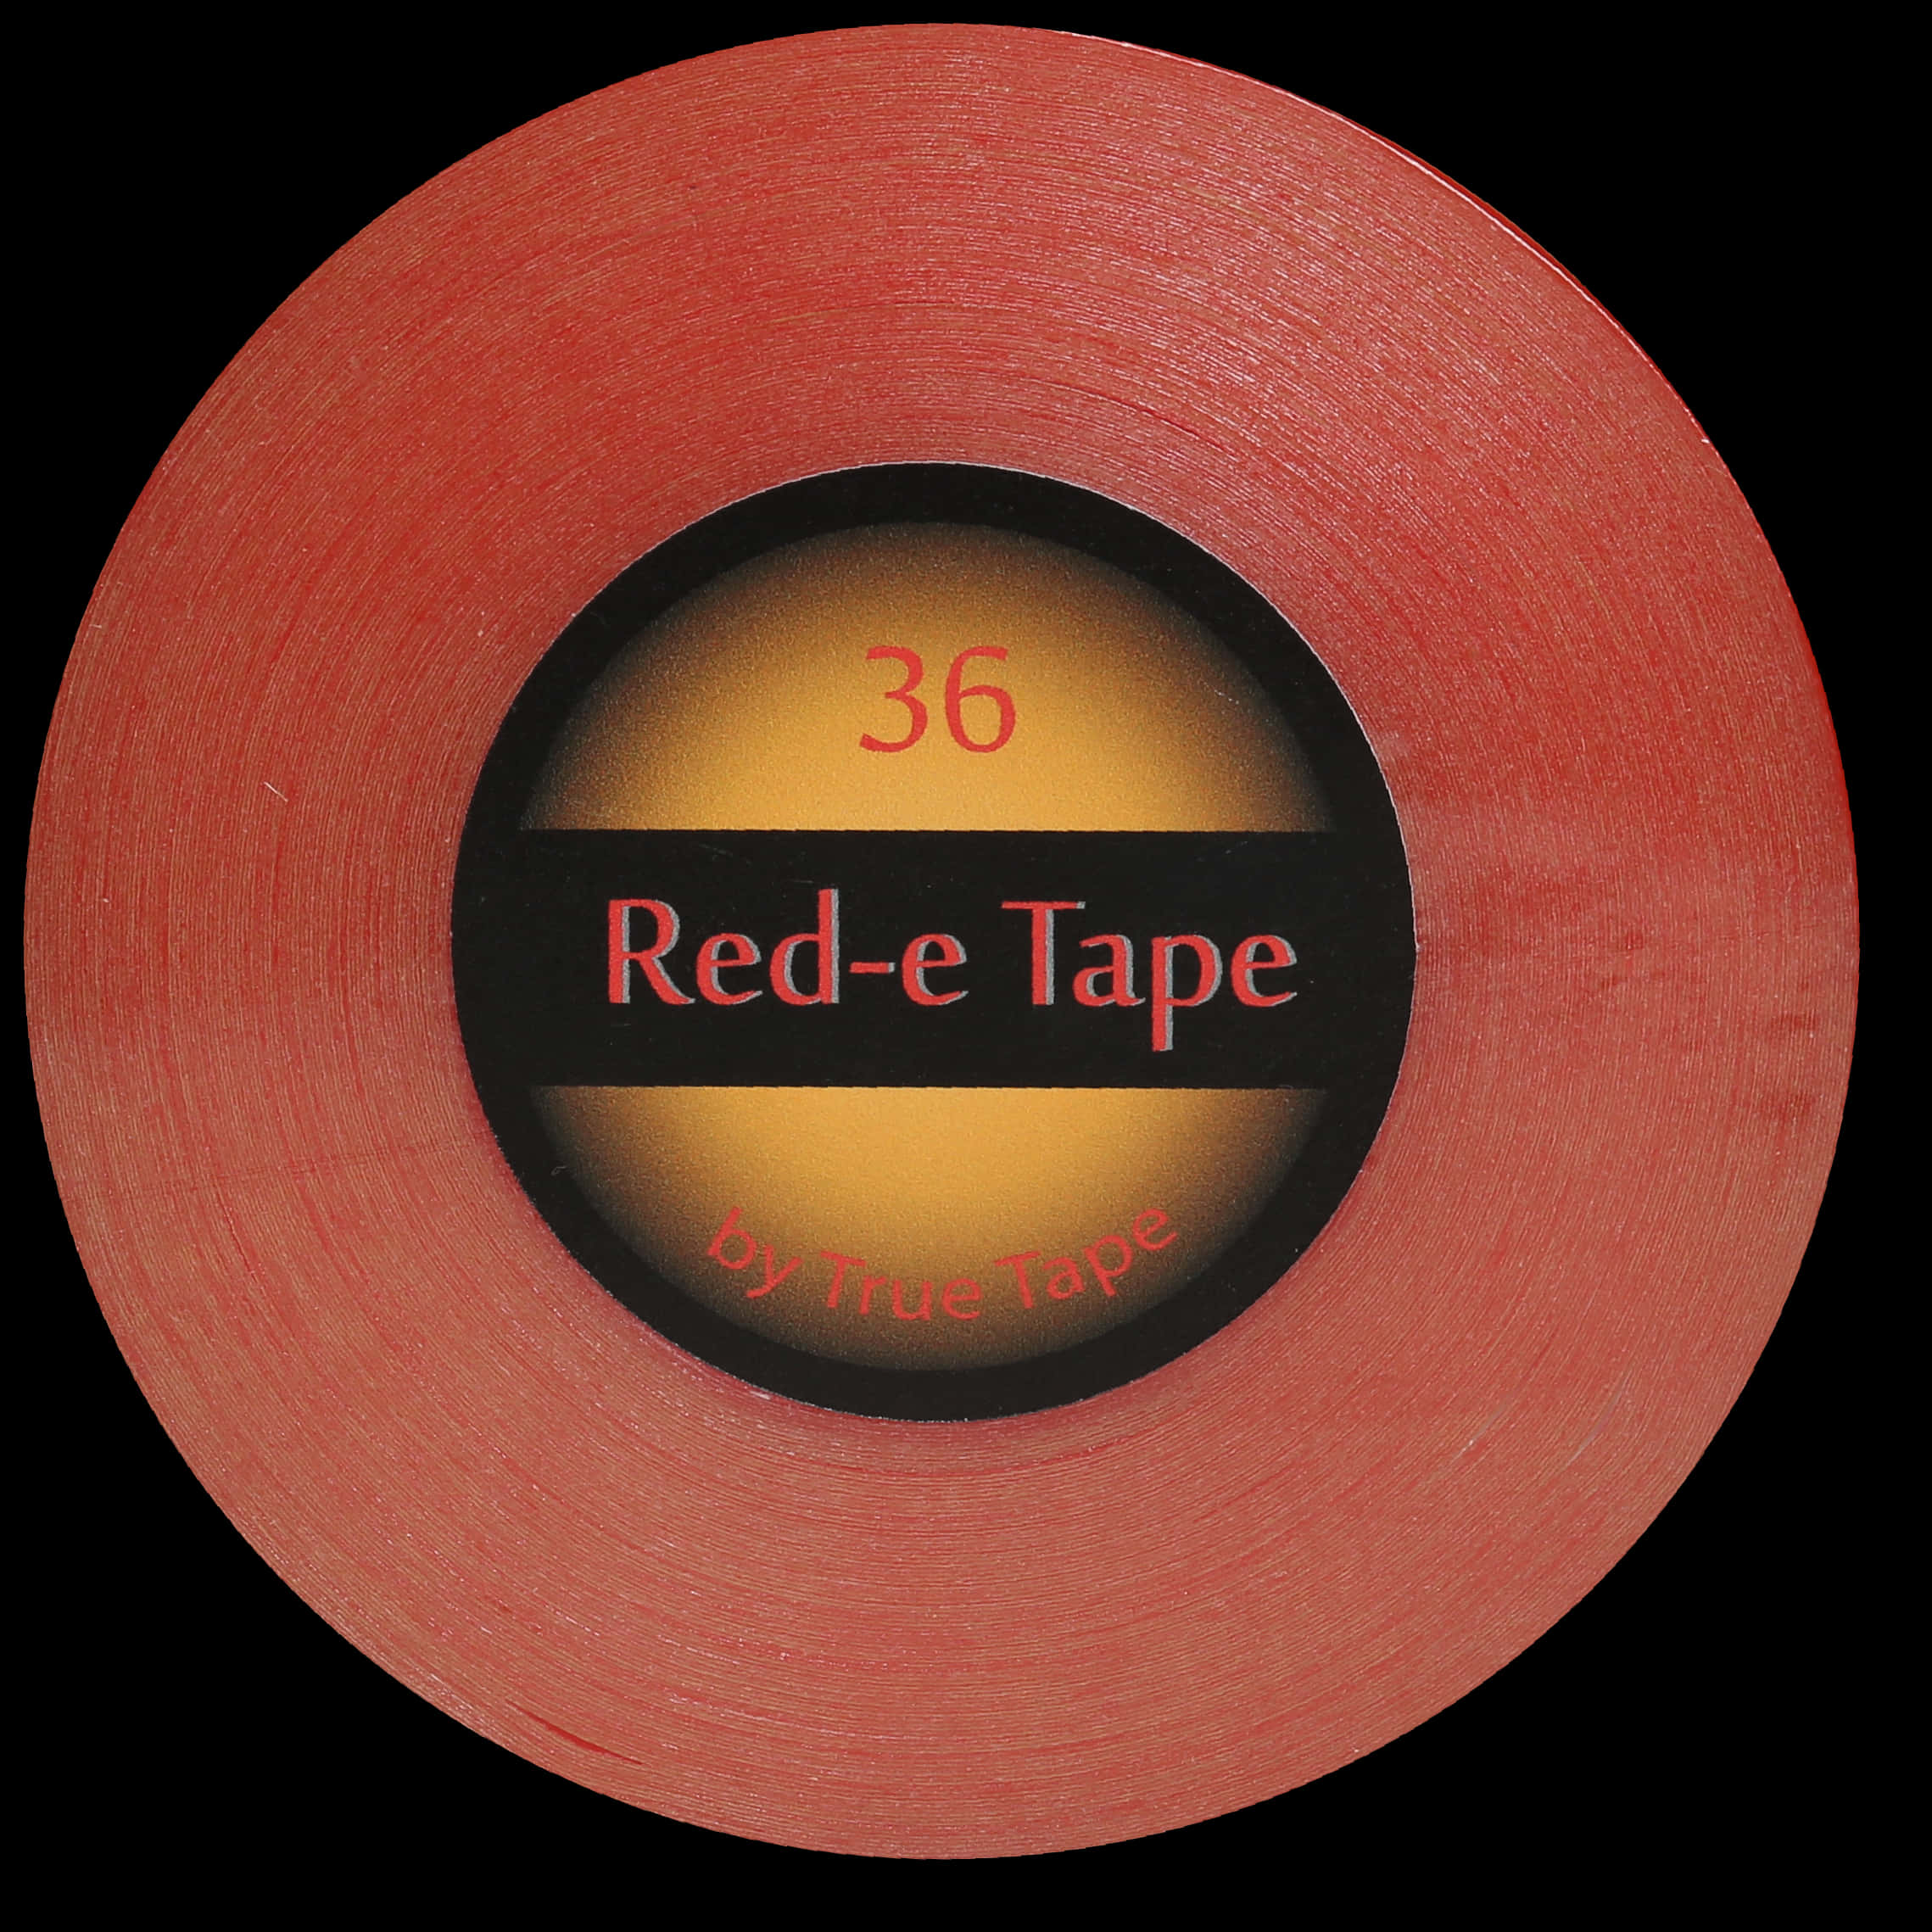 A Red Tape With A Black Label